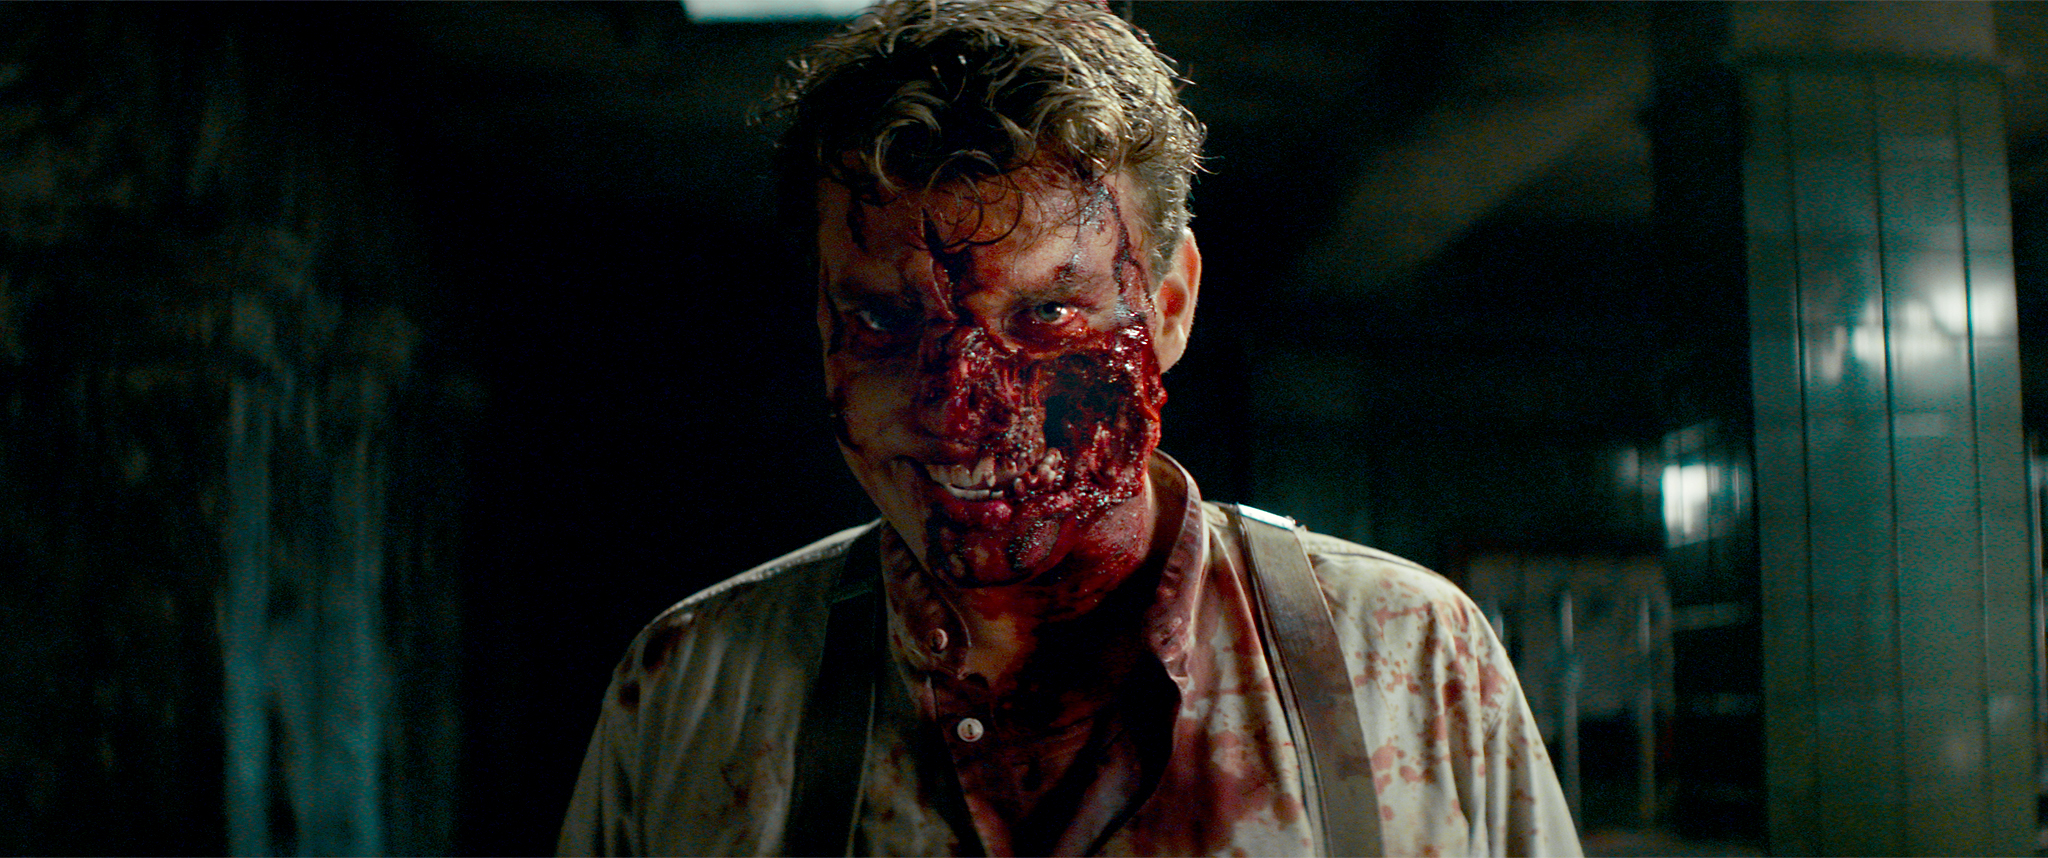 Wafner with his mouth and cheek cut open, covered in blood, in Overlord.